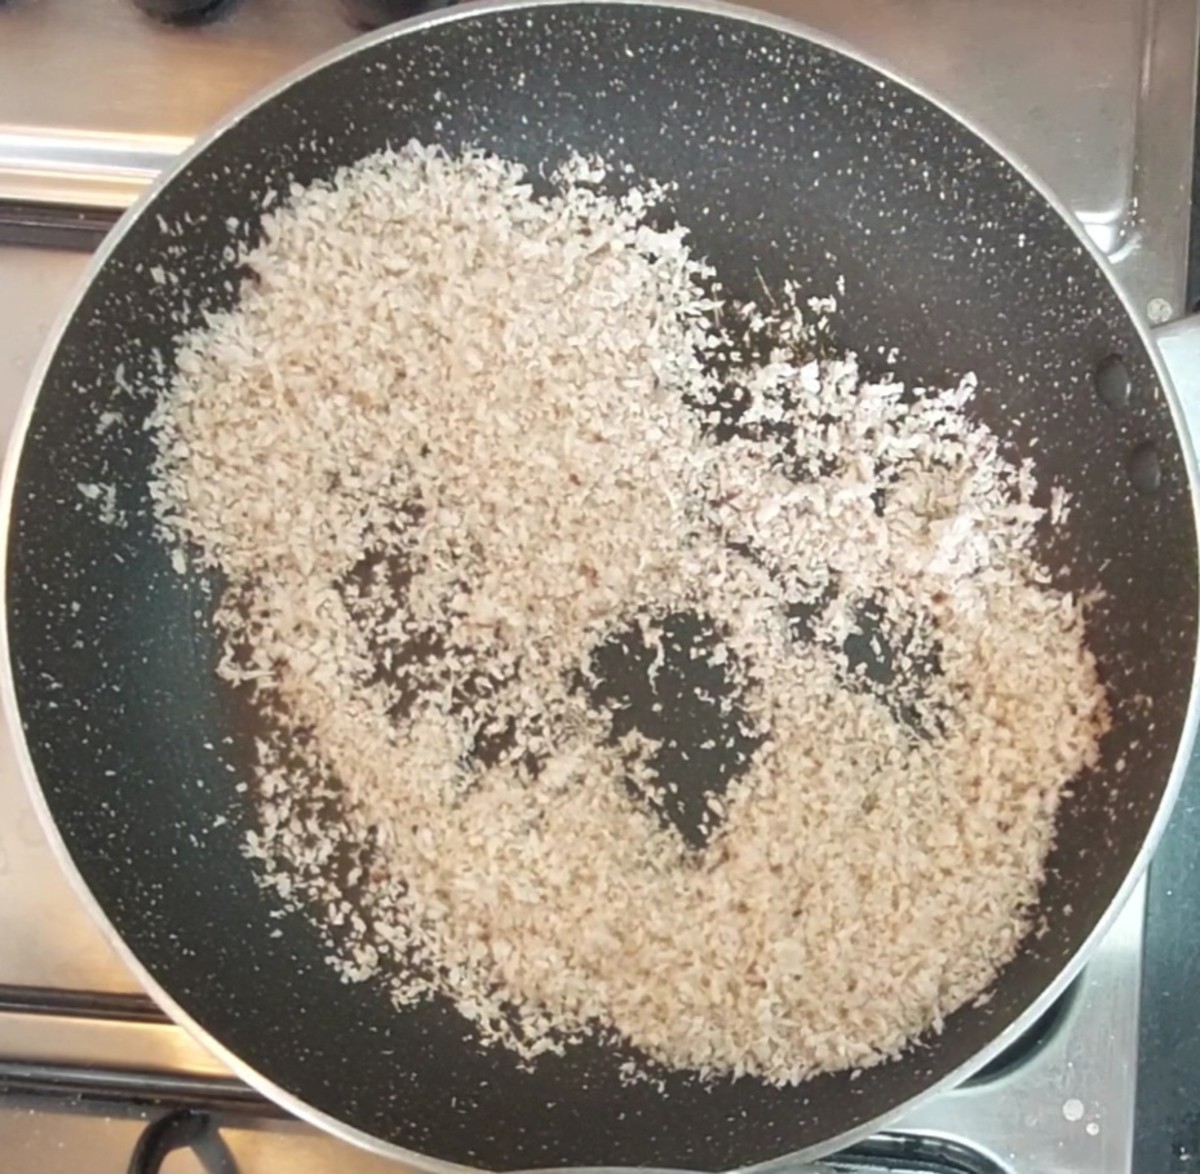 In the same pan, add 1/2 cup fresh grated coconut. Fry for 5 minutes or till the coconut dries. Transfer to a plate.